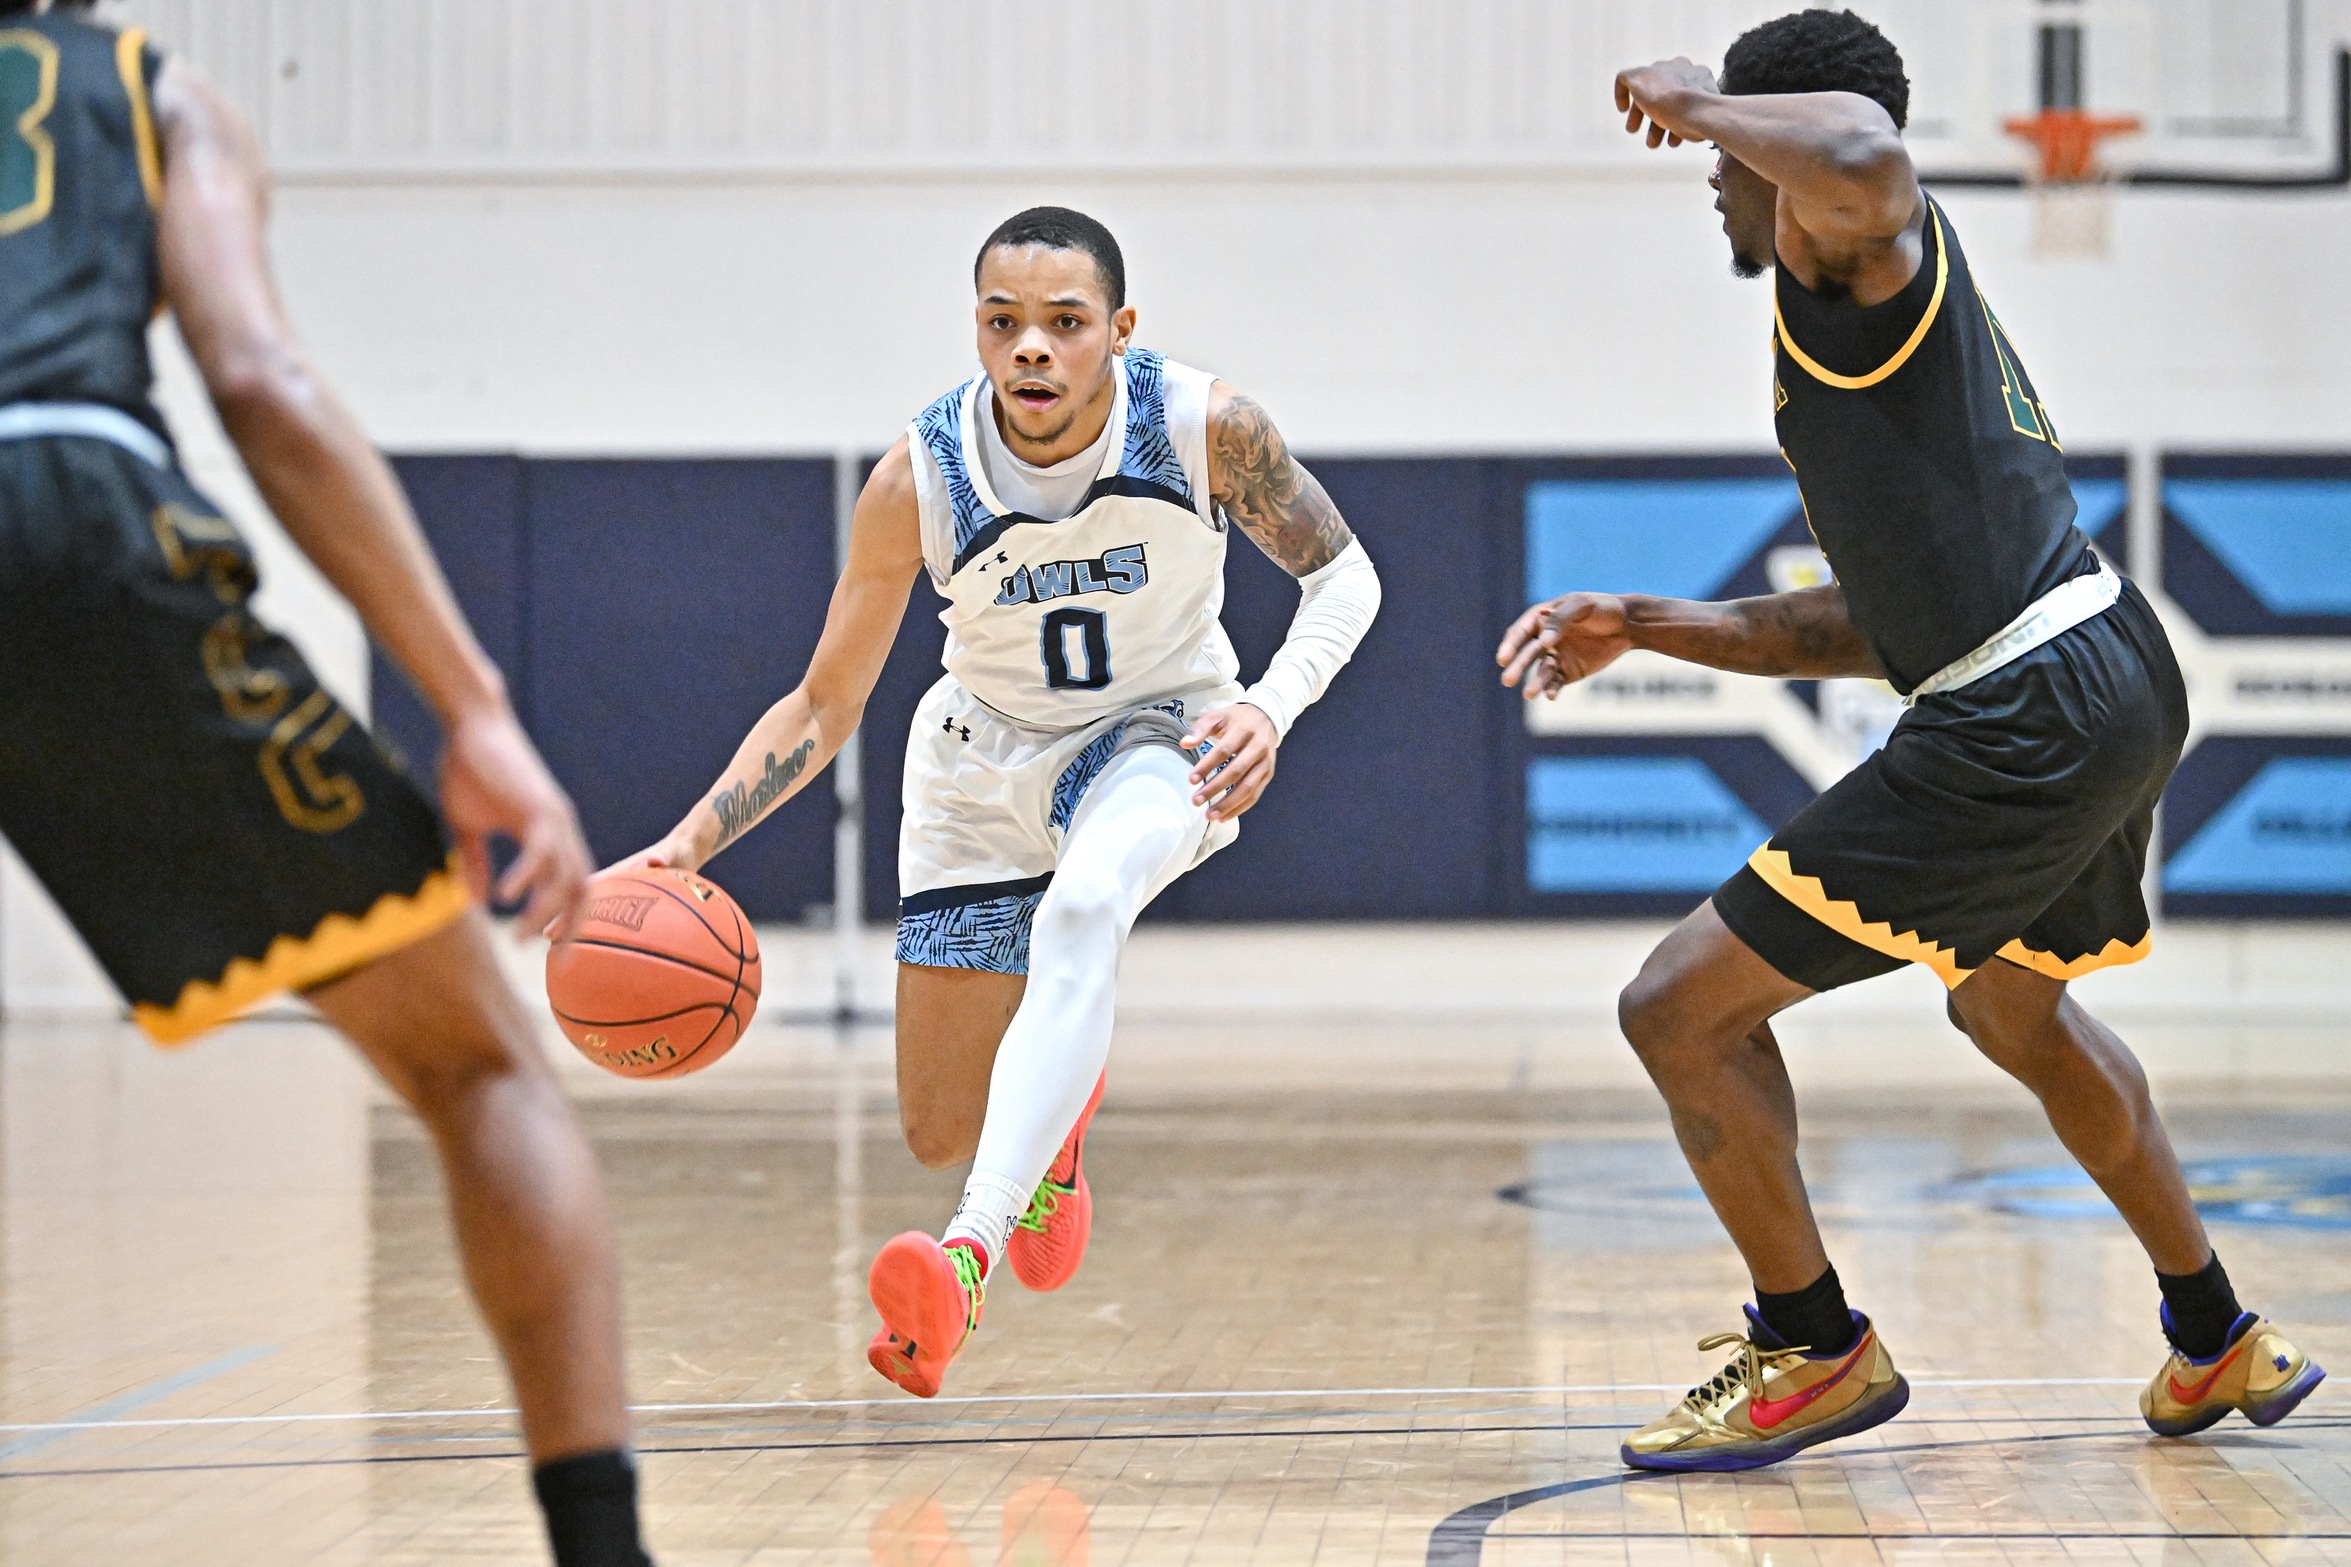 Owls Bounce Back vs. RCSJ Cumberland Behind Jackson’s Triple-Double, Tremble’s Big Night From Deep